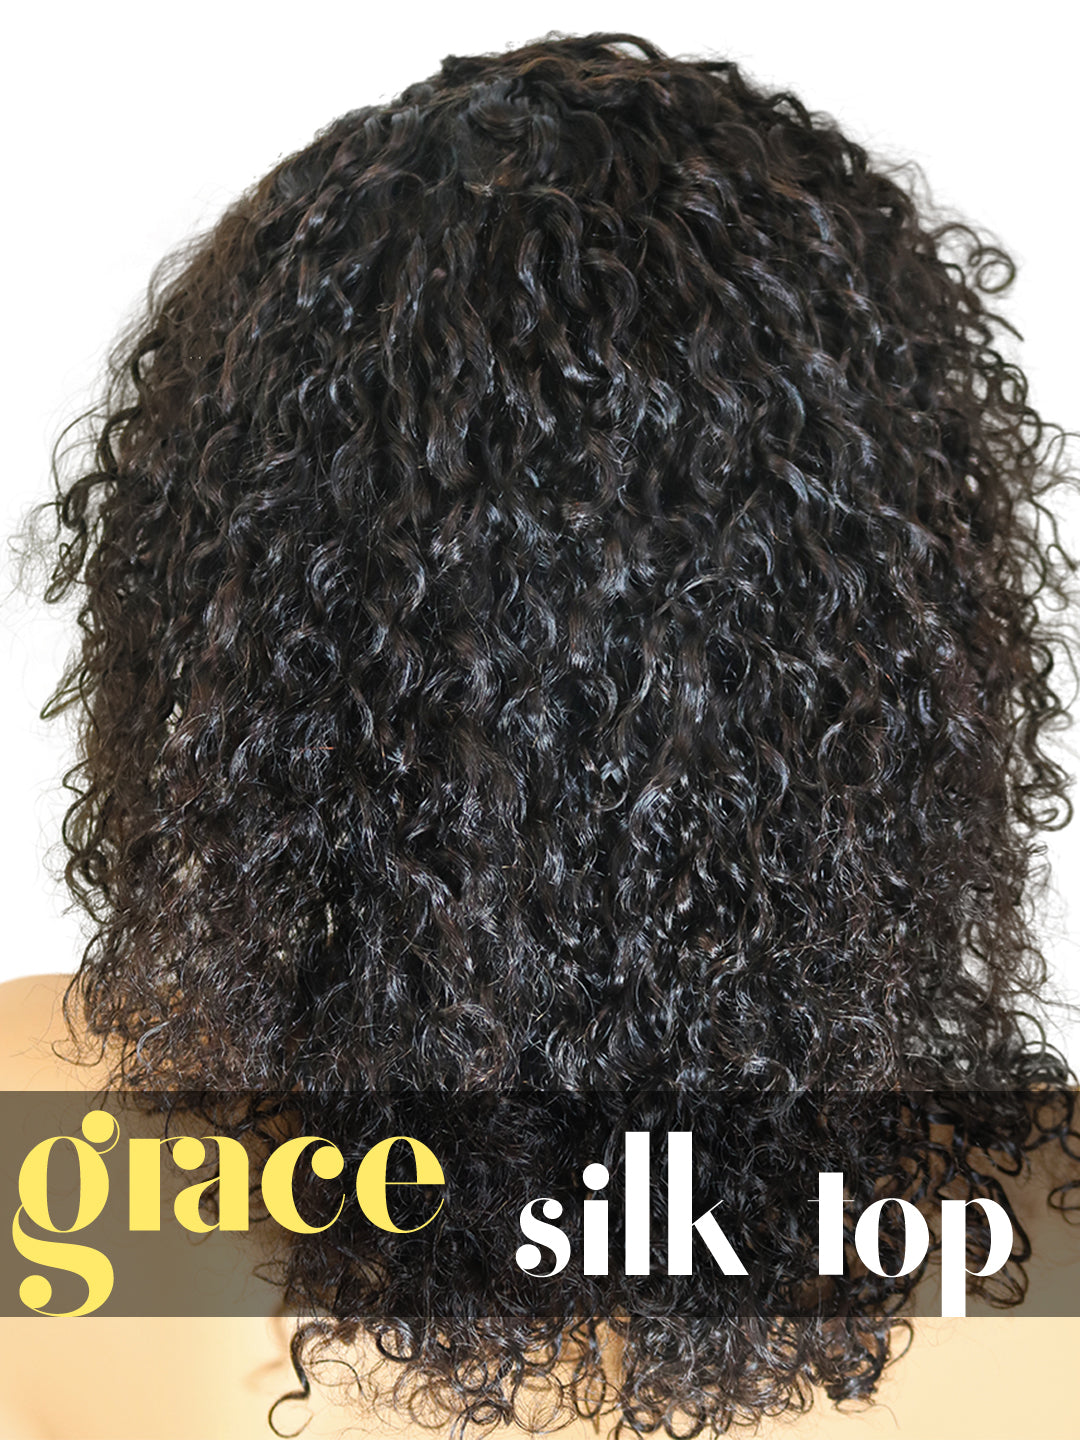 SILK TOP LACE WIG: Deep Curly